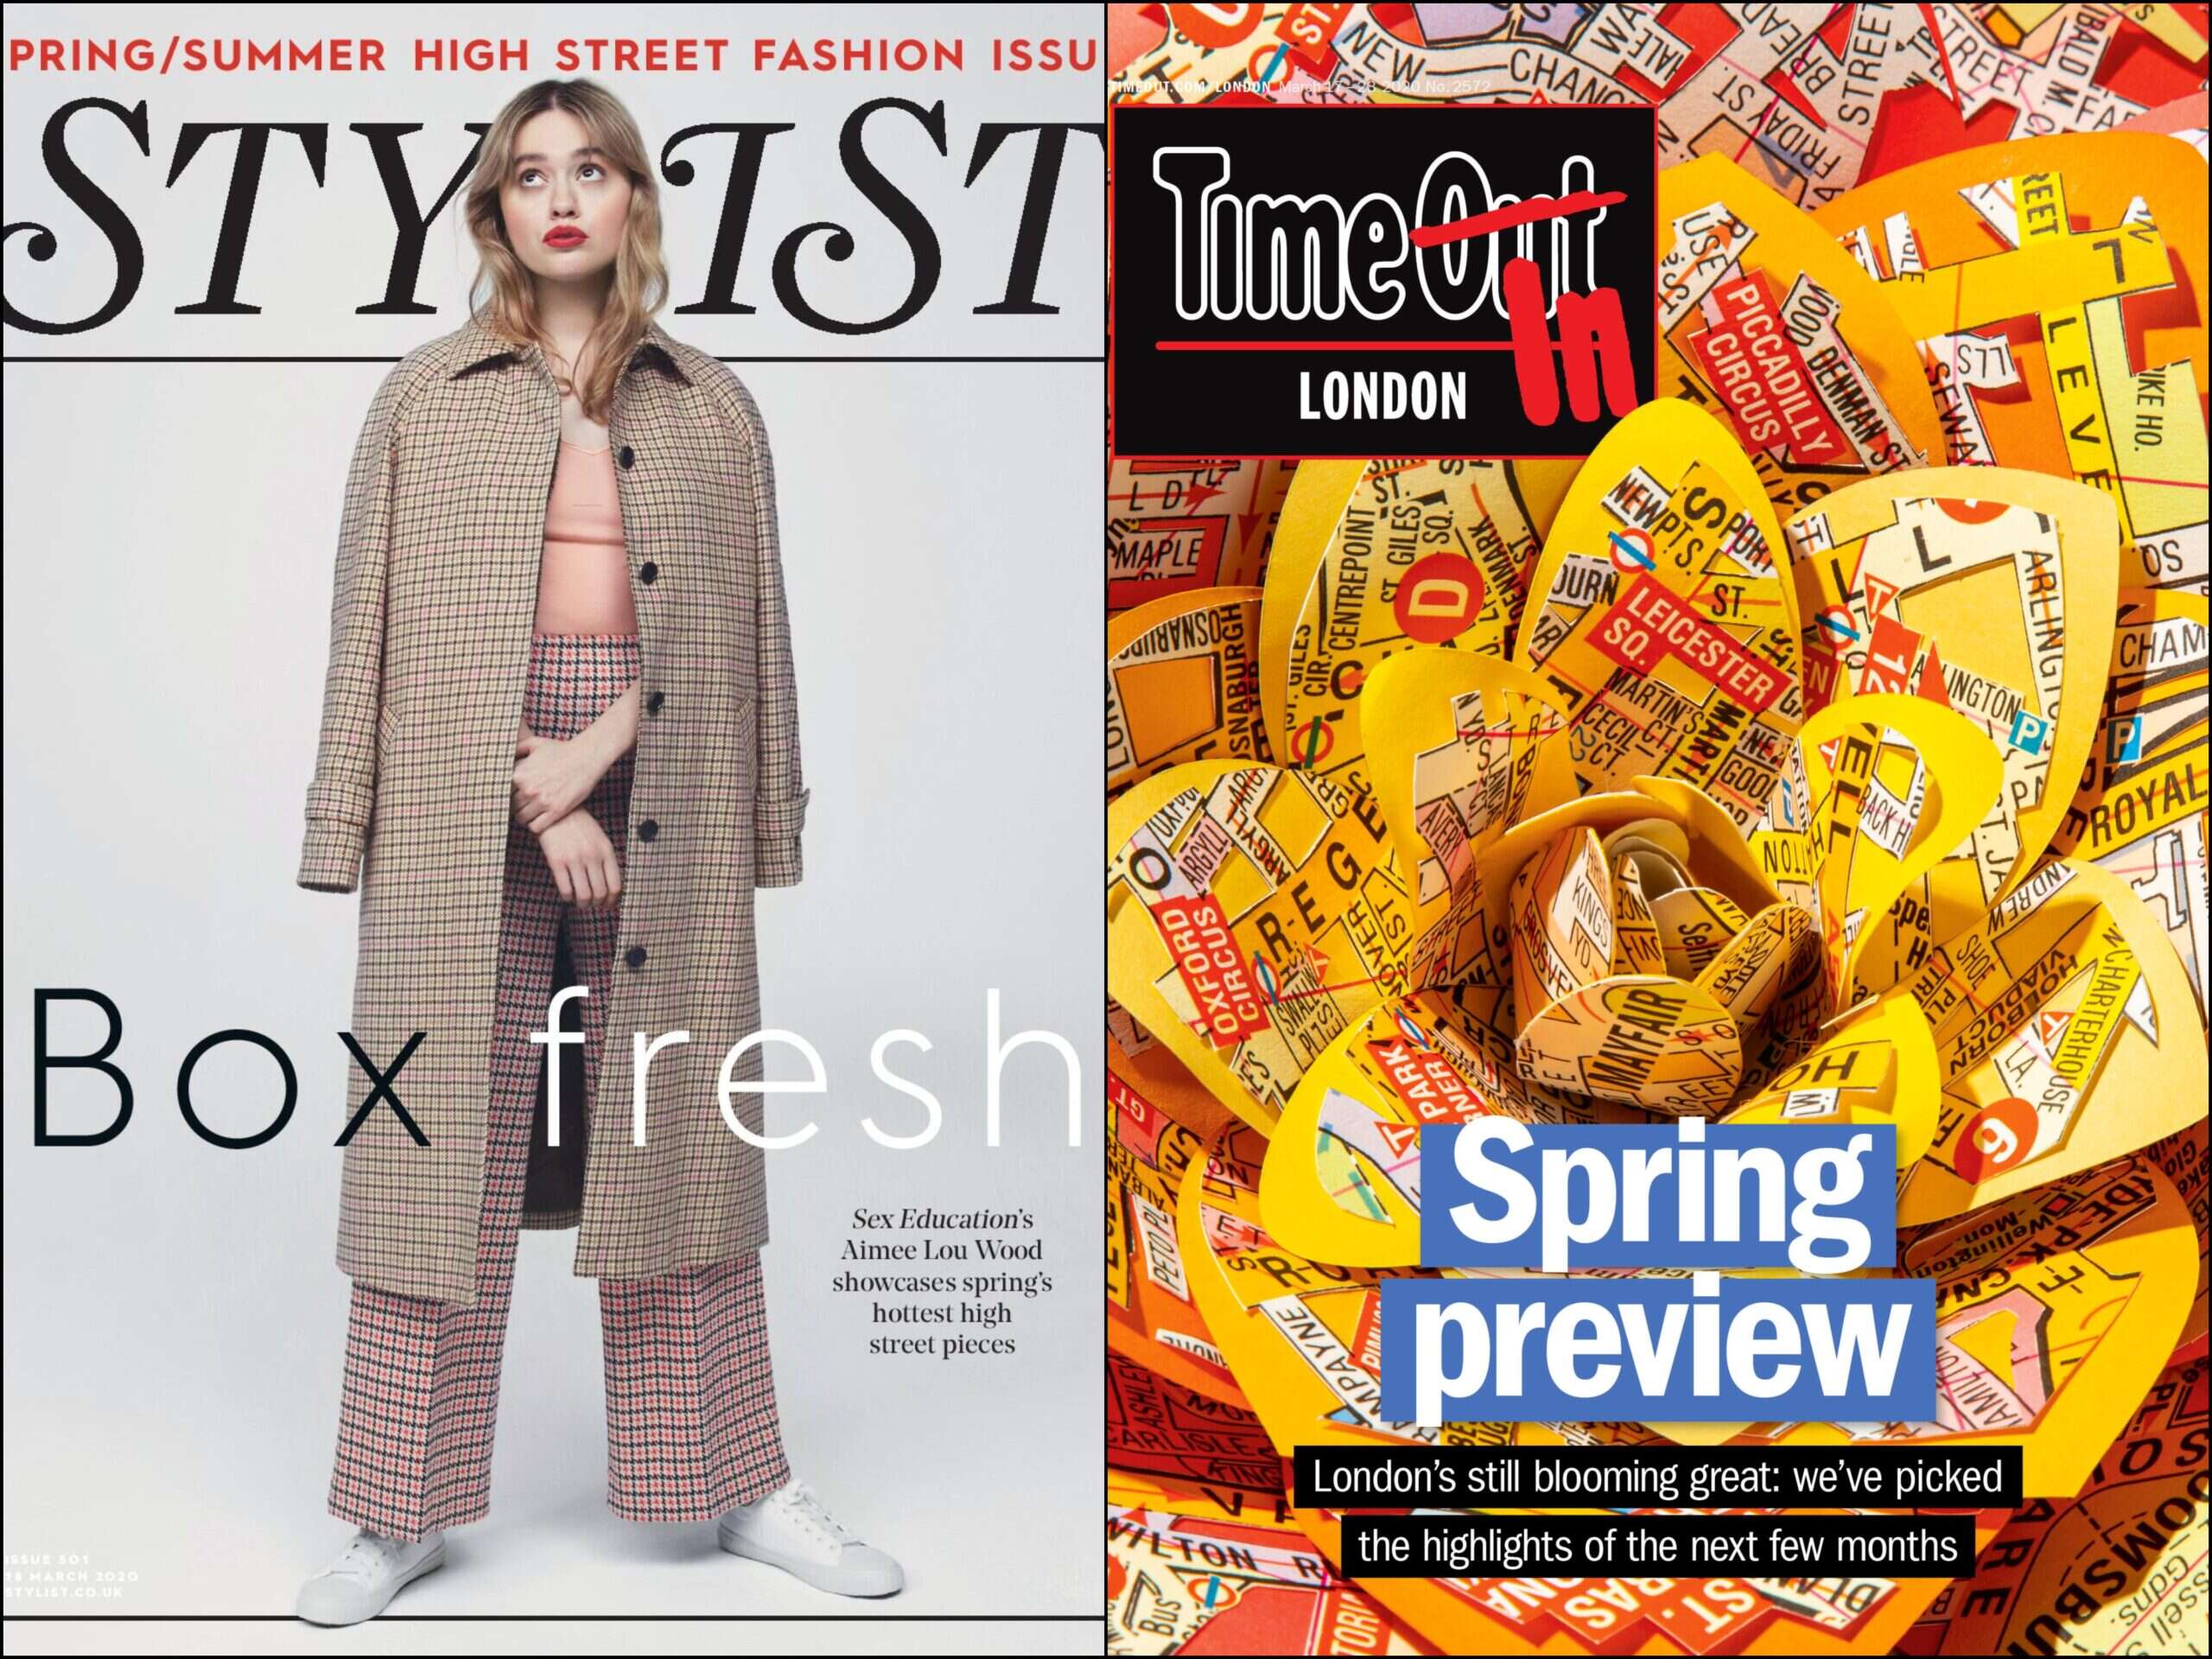 Coronavirus: Time Out and Stylist free magazines go digital-only as readers stay home